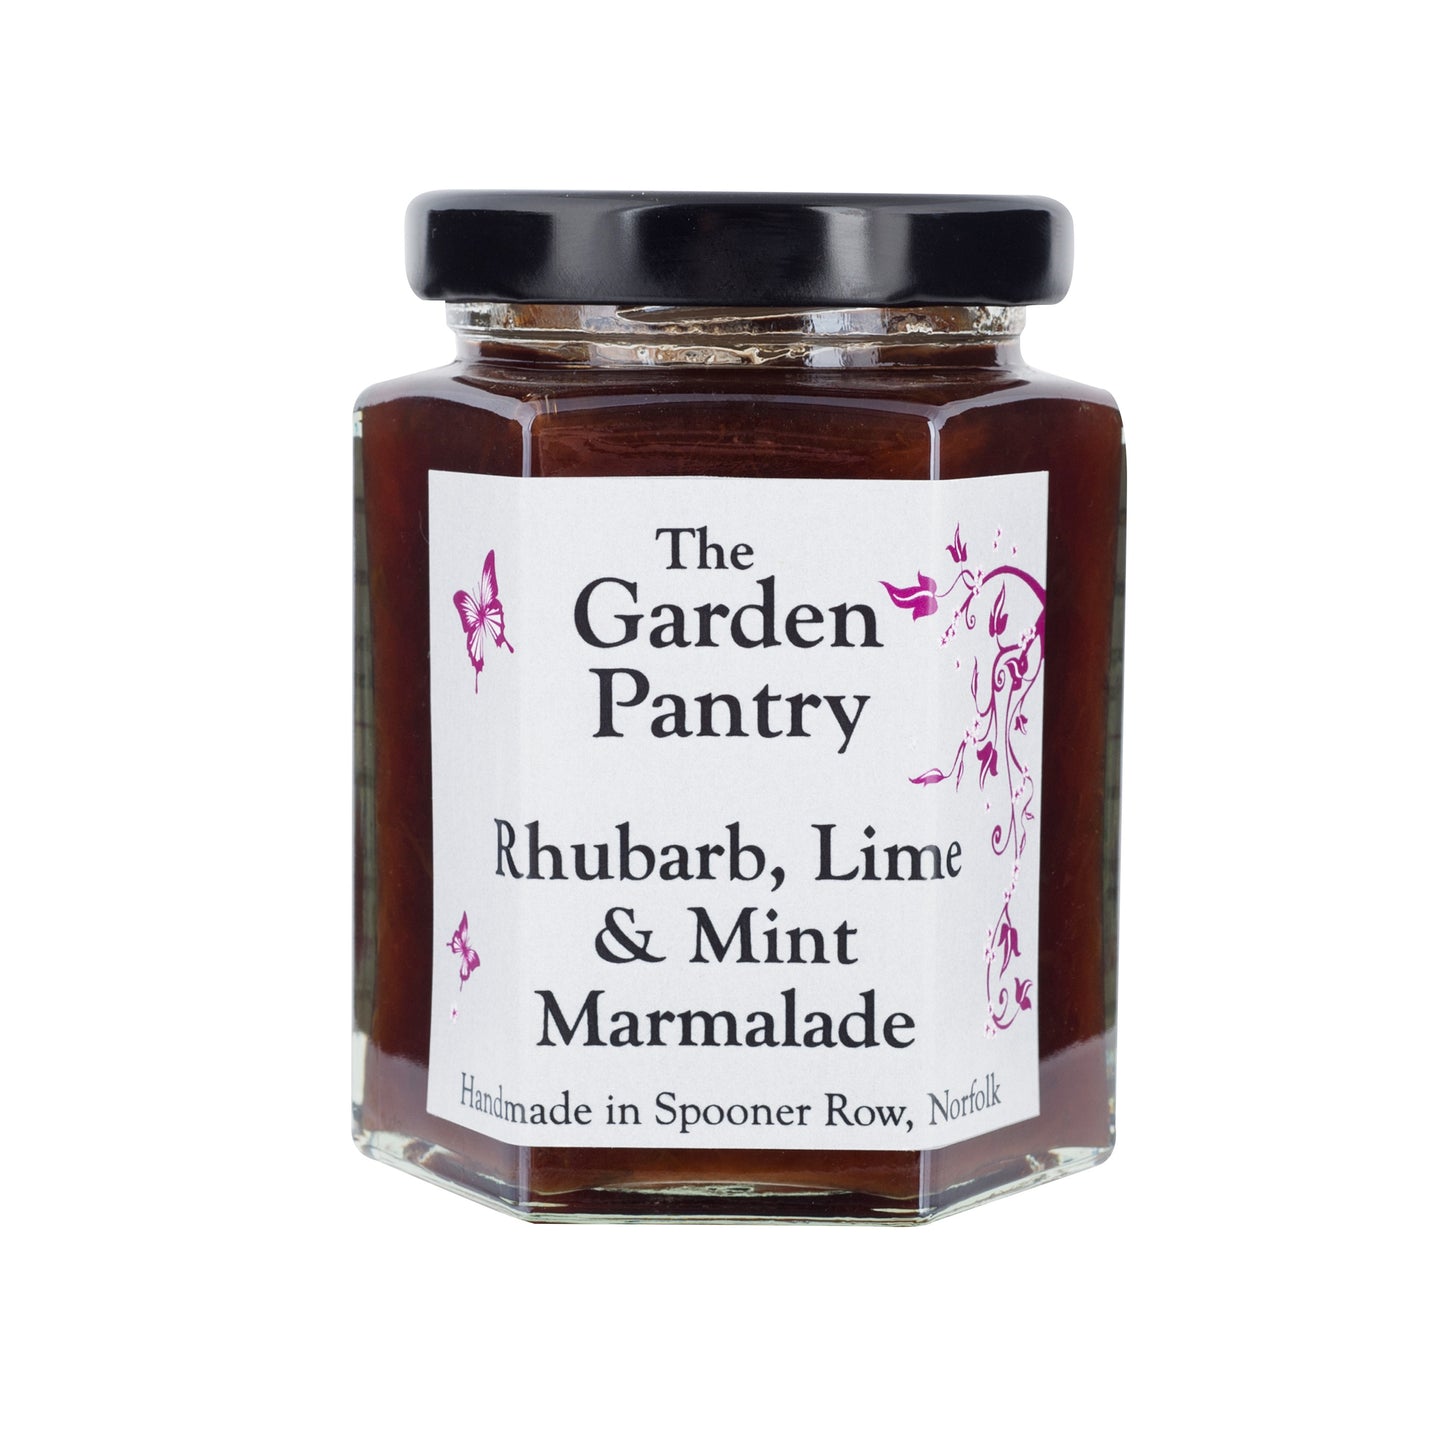 The Garden Pantry Rhubarb, Lime & Mint Marmalade